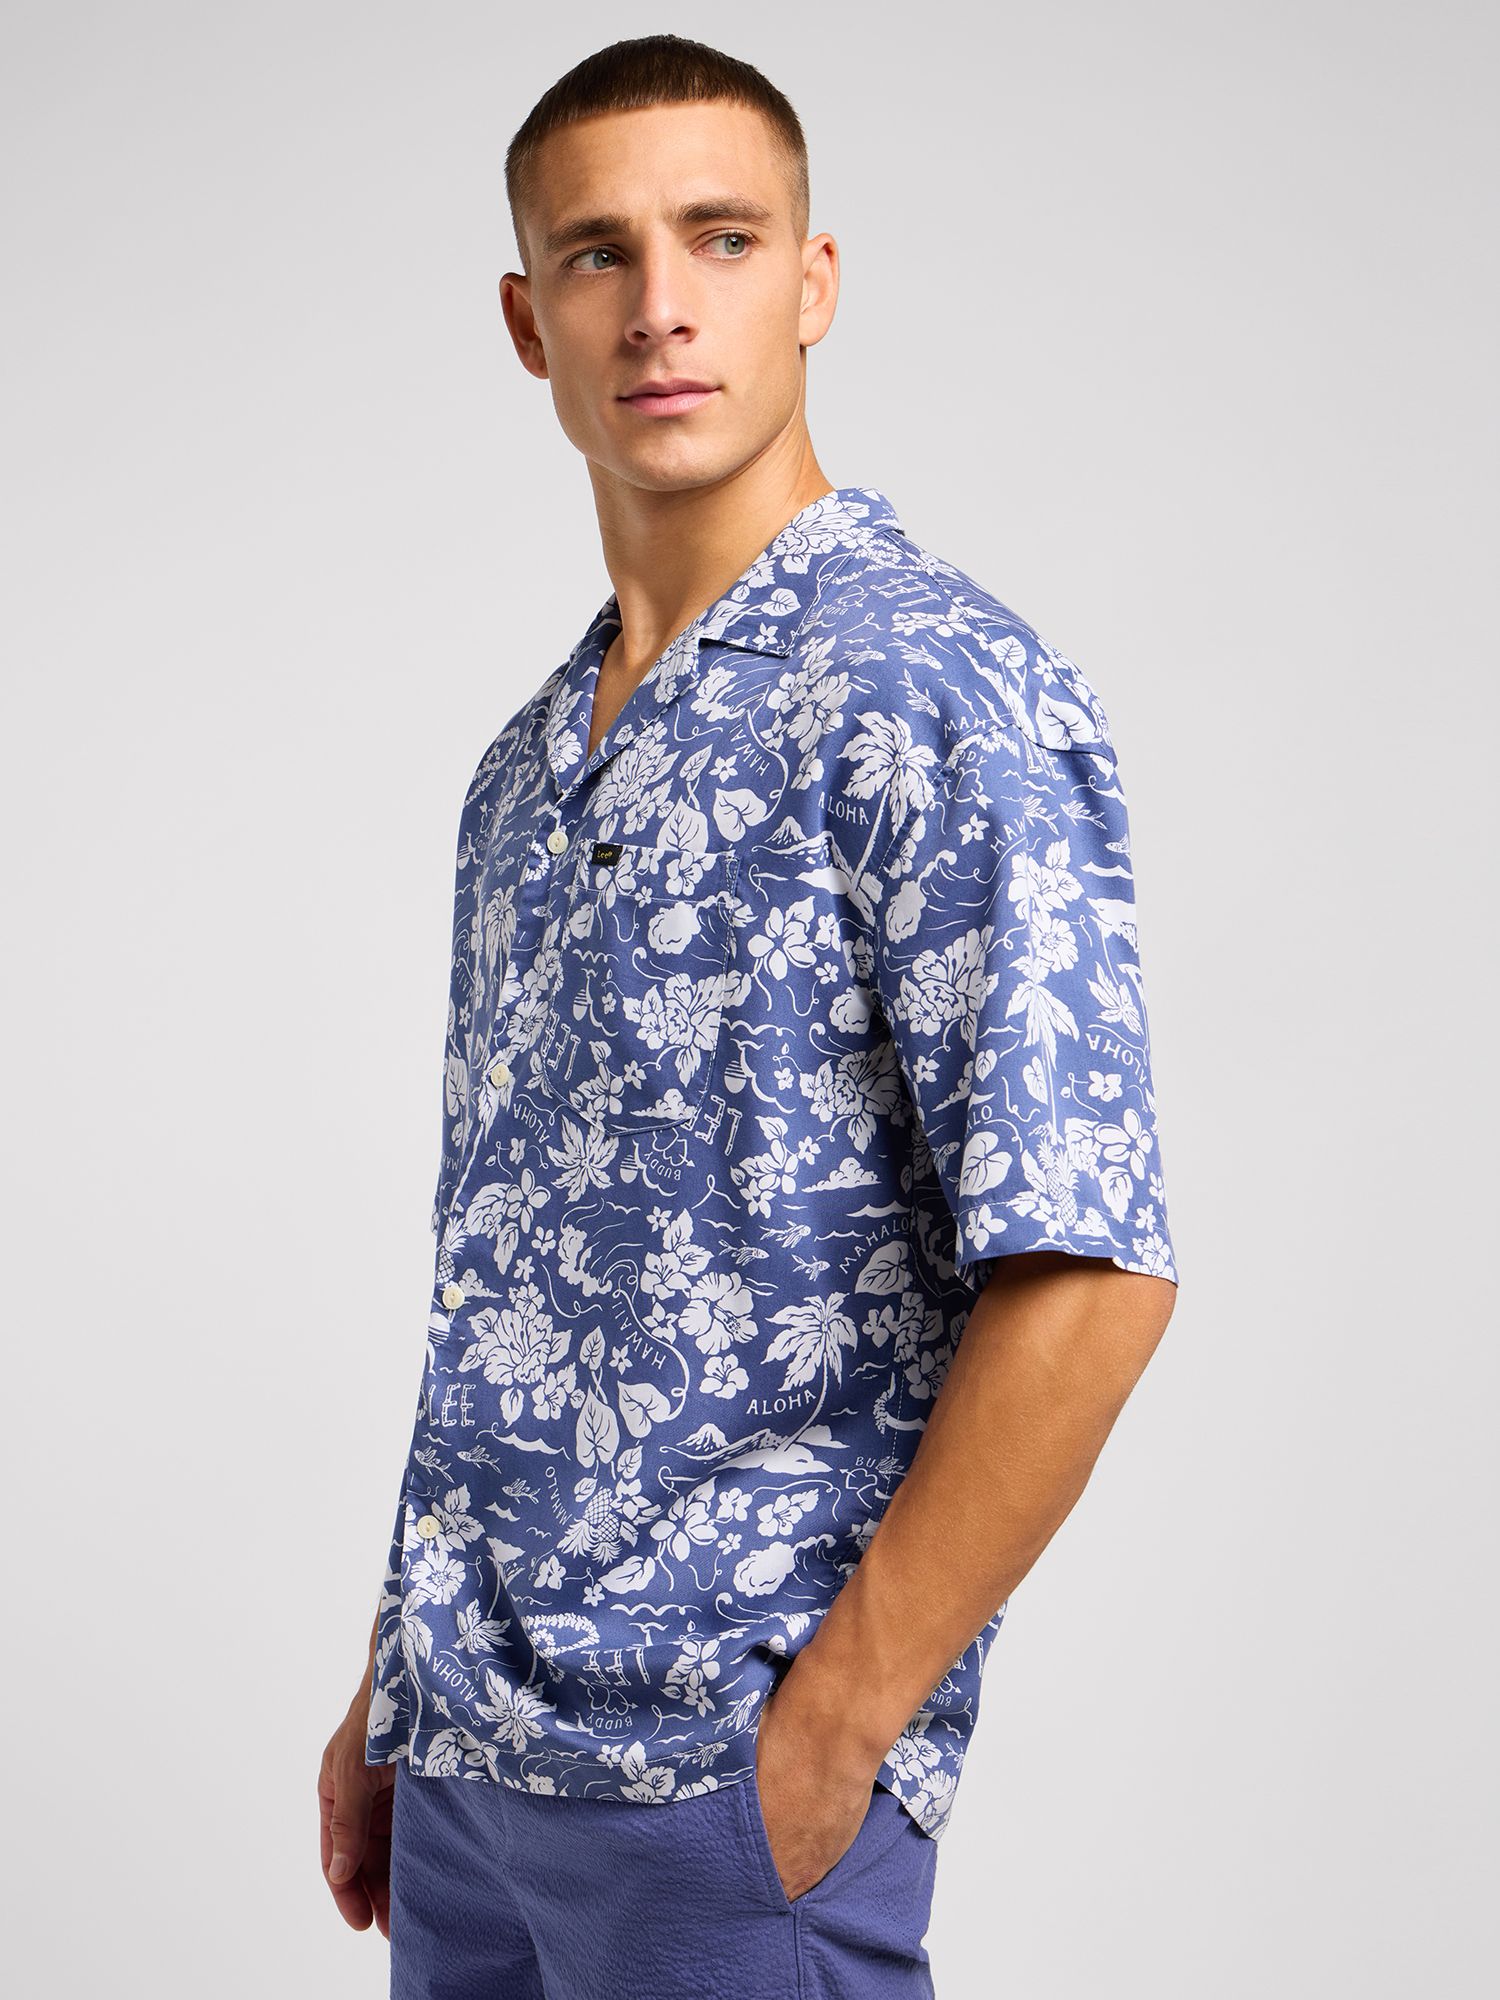 Lee Loose Fit Resort Style Shirt, Blue/White, S